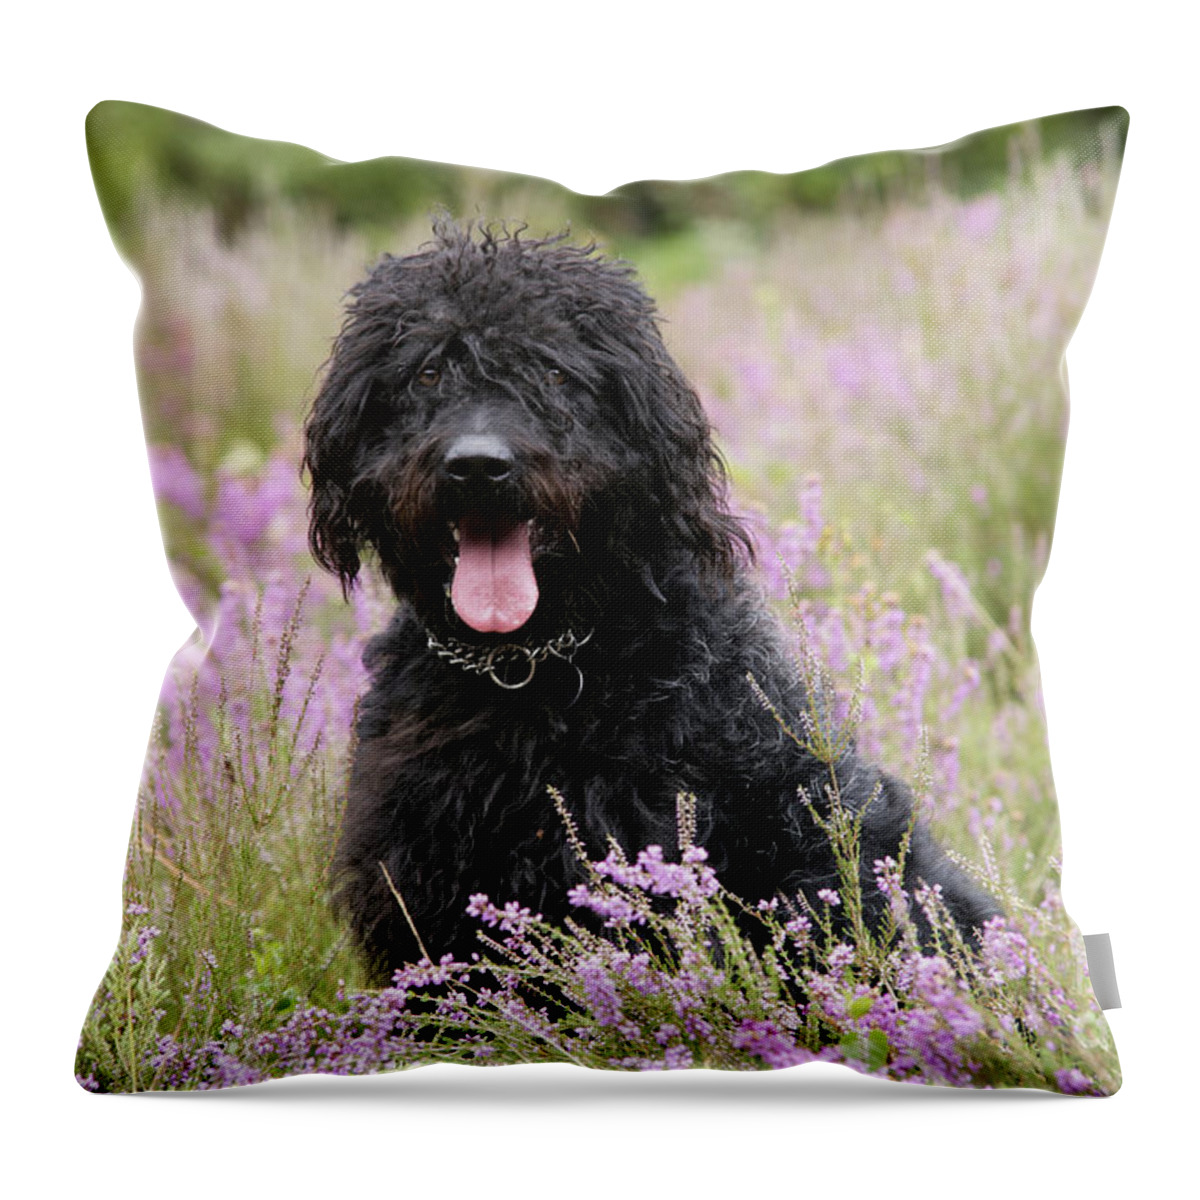 Labradoodle Throw Pillow featuring the photograph Black Labradoodle by John Daniels